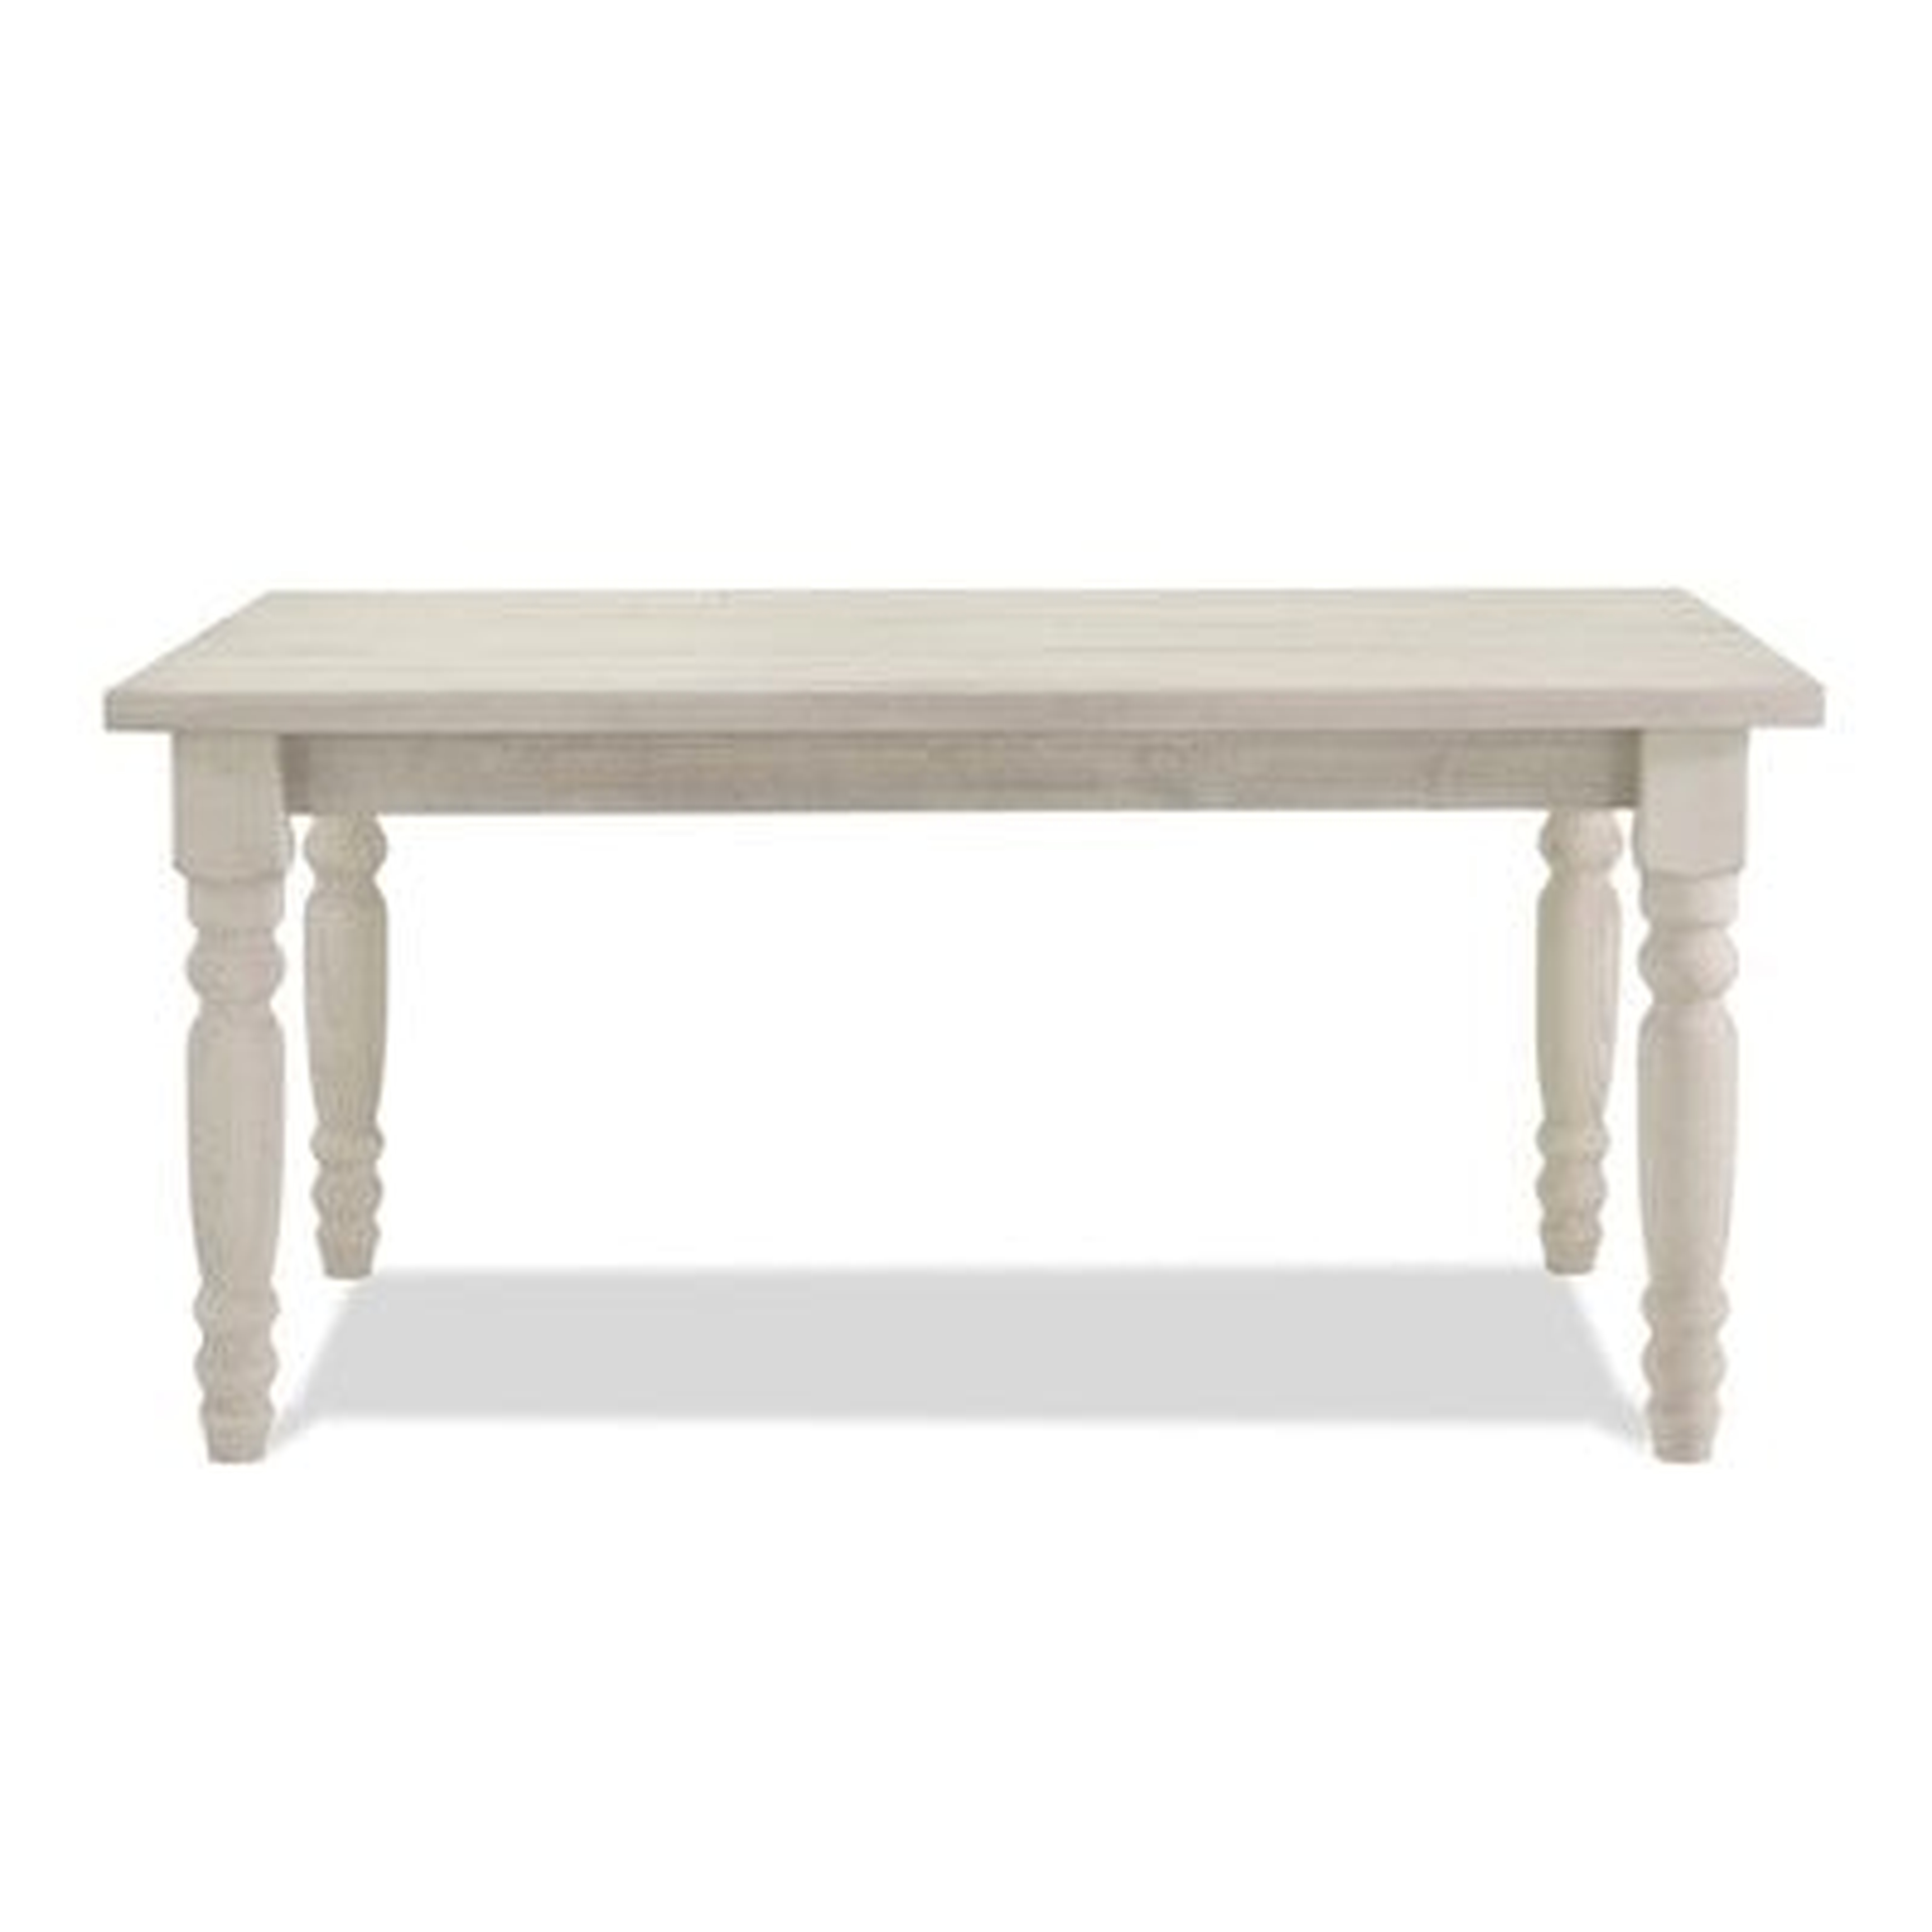 Valerie 63'' Pine Solid Wood Dining Table, Off-White - Wayfair